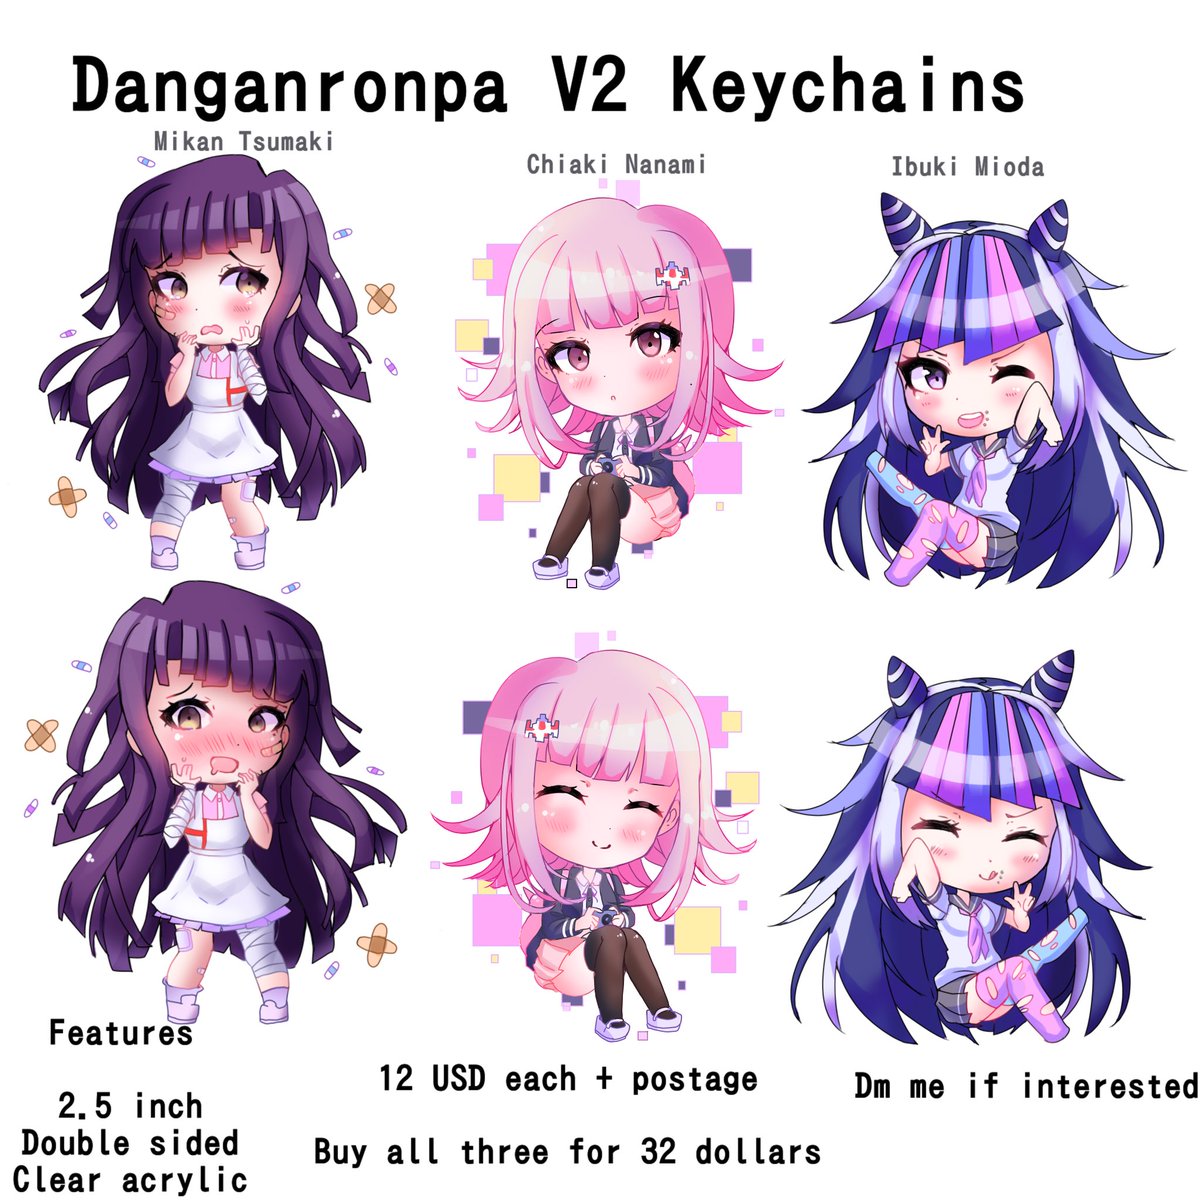 Cwutey On Twitter Danganronpa V2 Keychains Preorders Open 12 Usd Each Postage Buy All 3 For 32 Postage Features Of The Keychains 2 5 Inches Clear Acrylic Double Sided Rts Are - face codes for roblox danganronpa